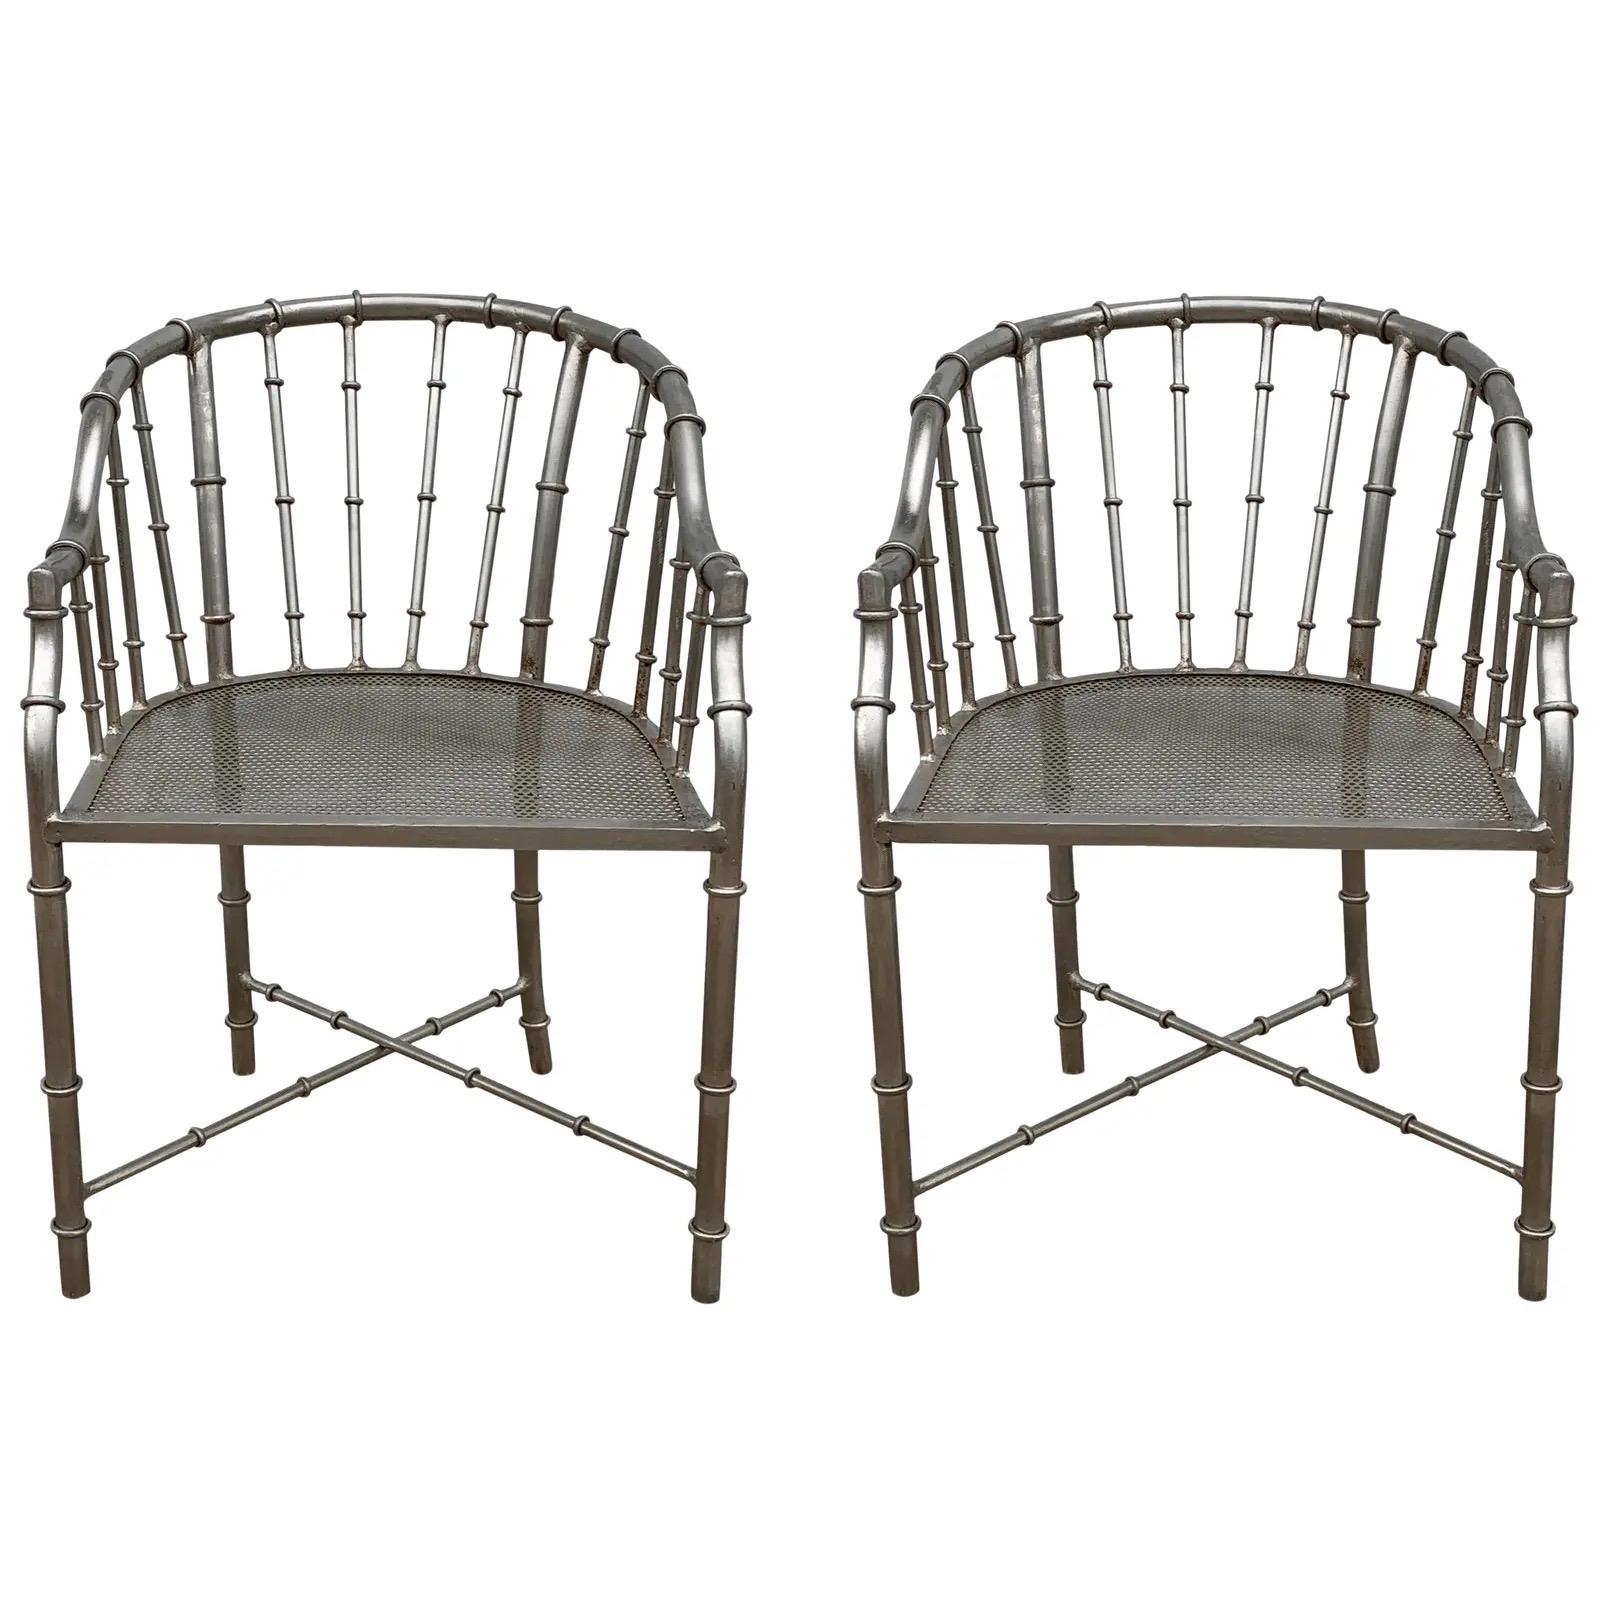 1960s French Jacques Adnet Style Faux Bamboo Steel Chairs, Pair For Sale